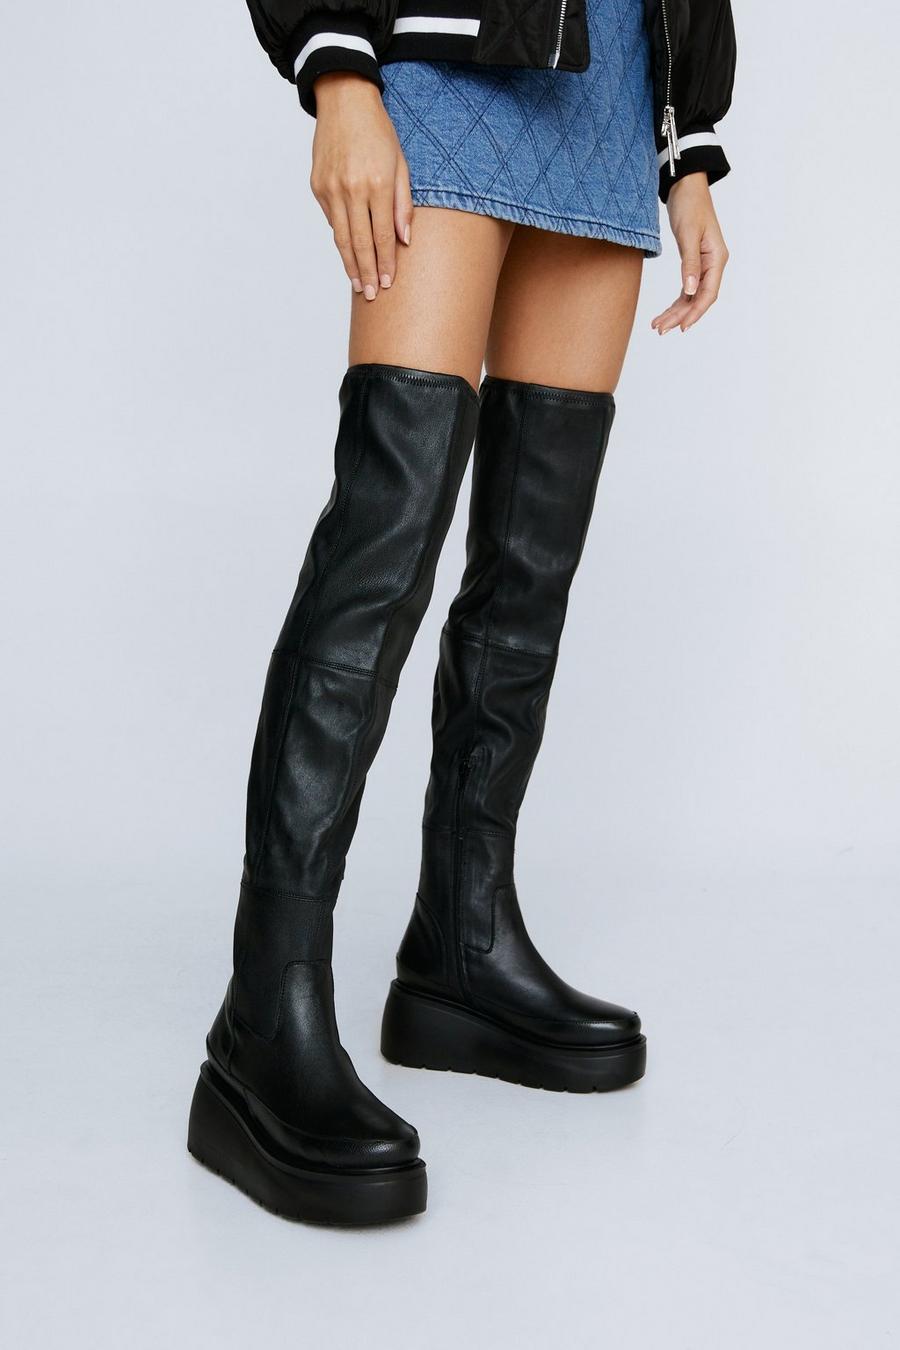 Premium Leather Wedge Thigh High Boots